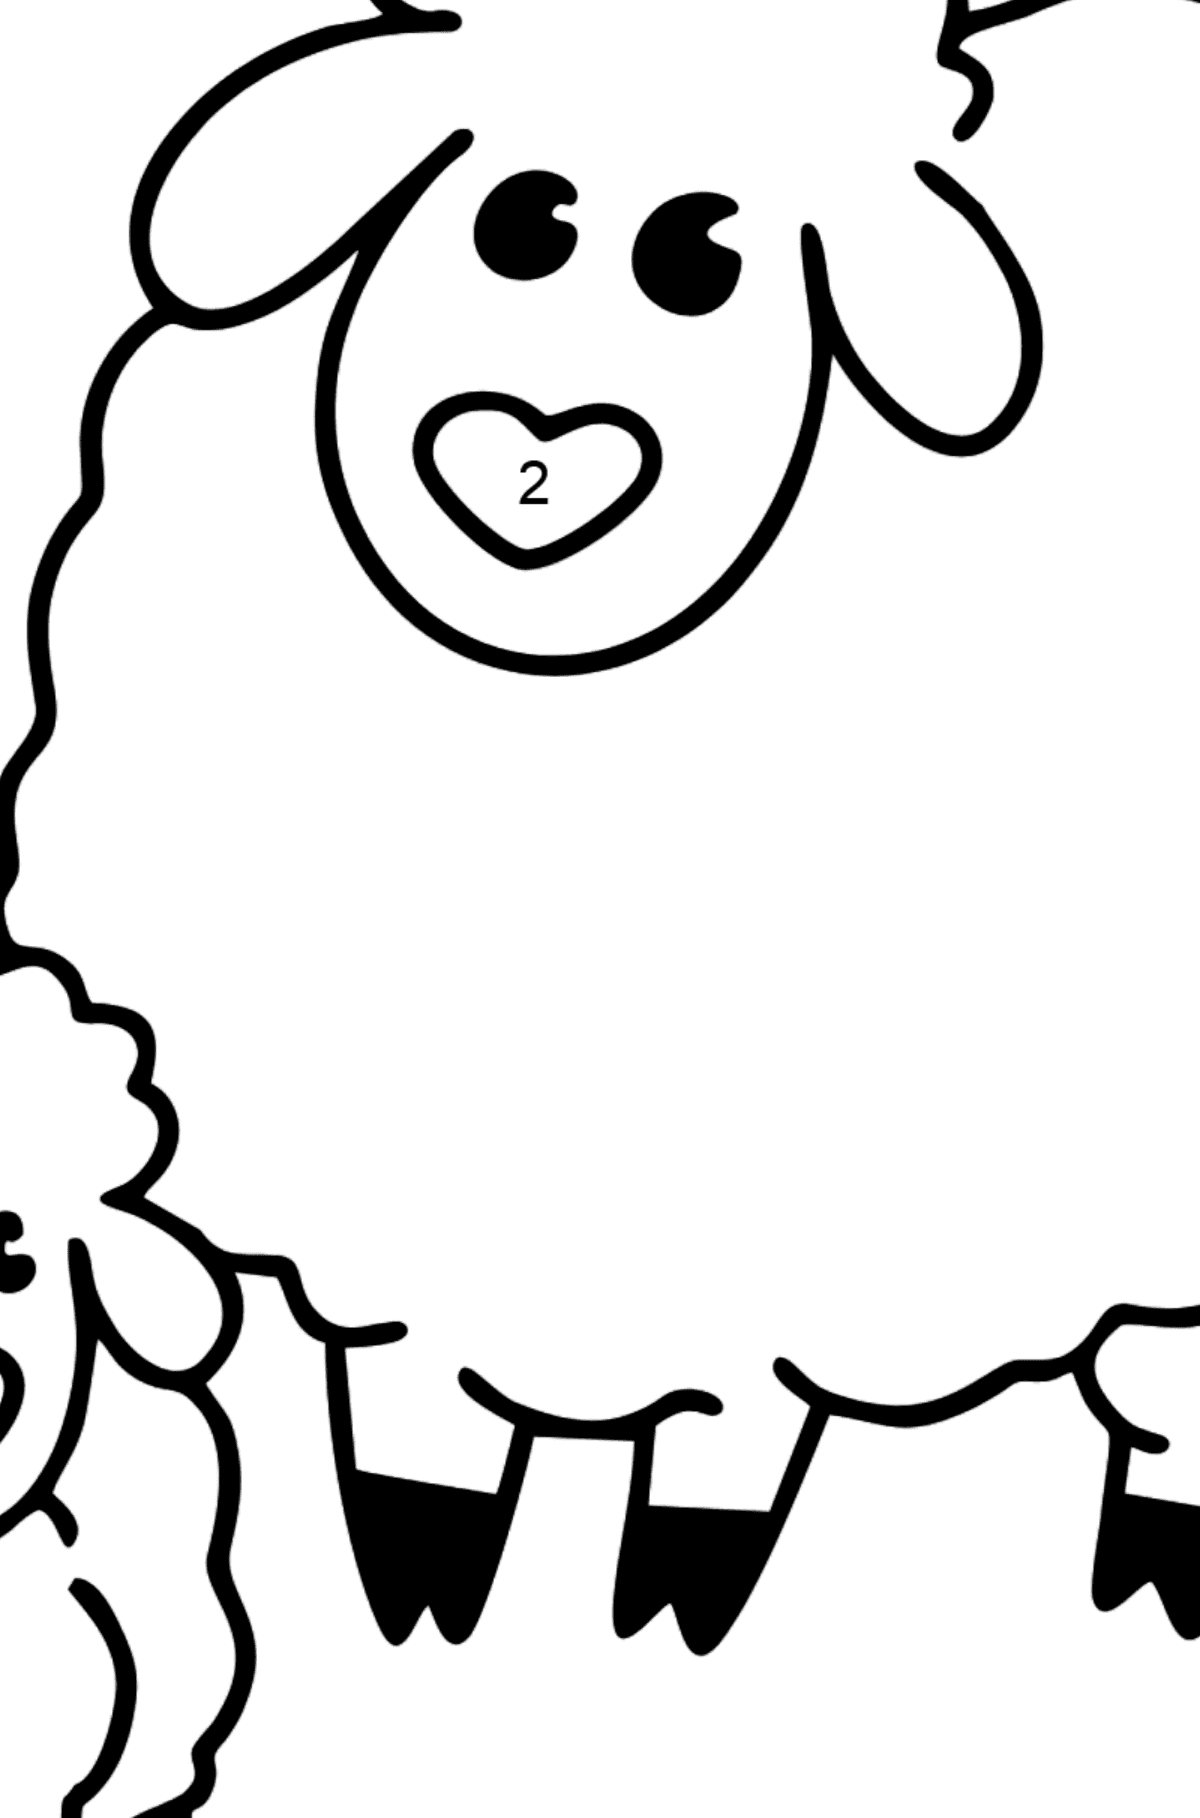 Sheep with Lamb coloring page - Coloring by Numbers for Kids